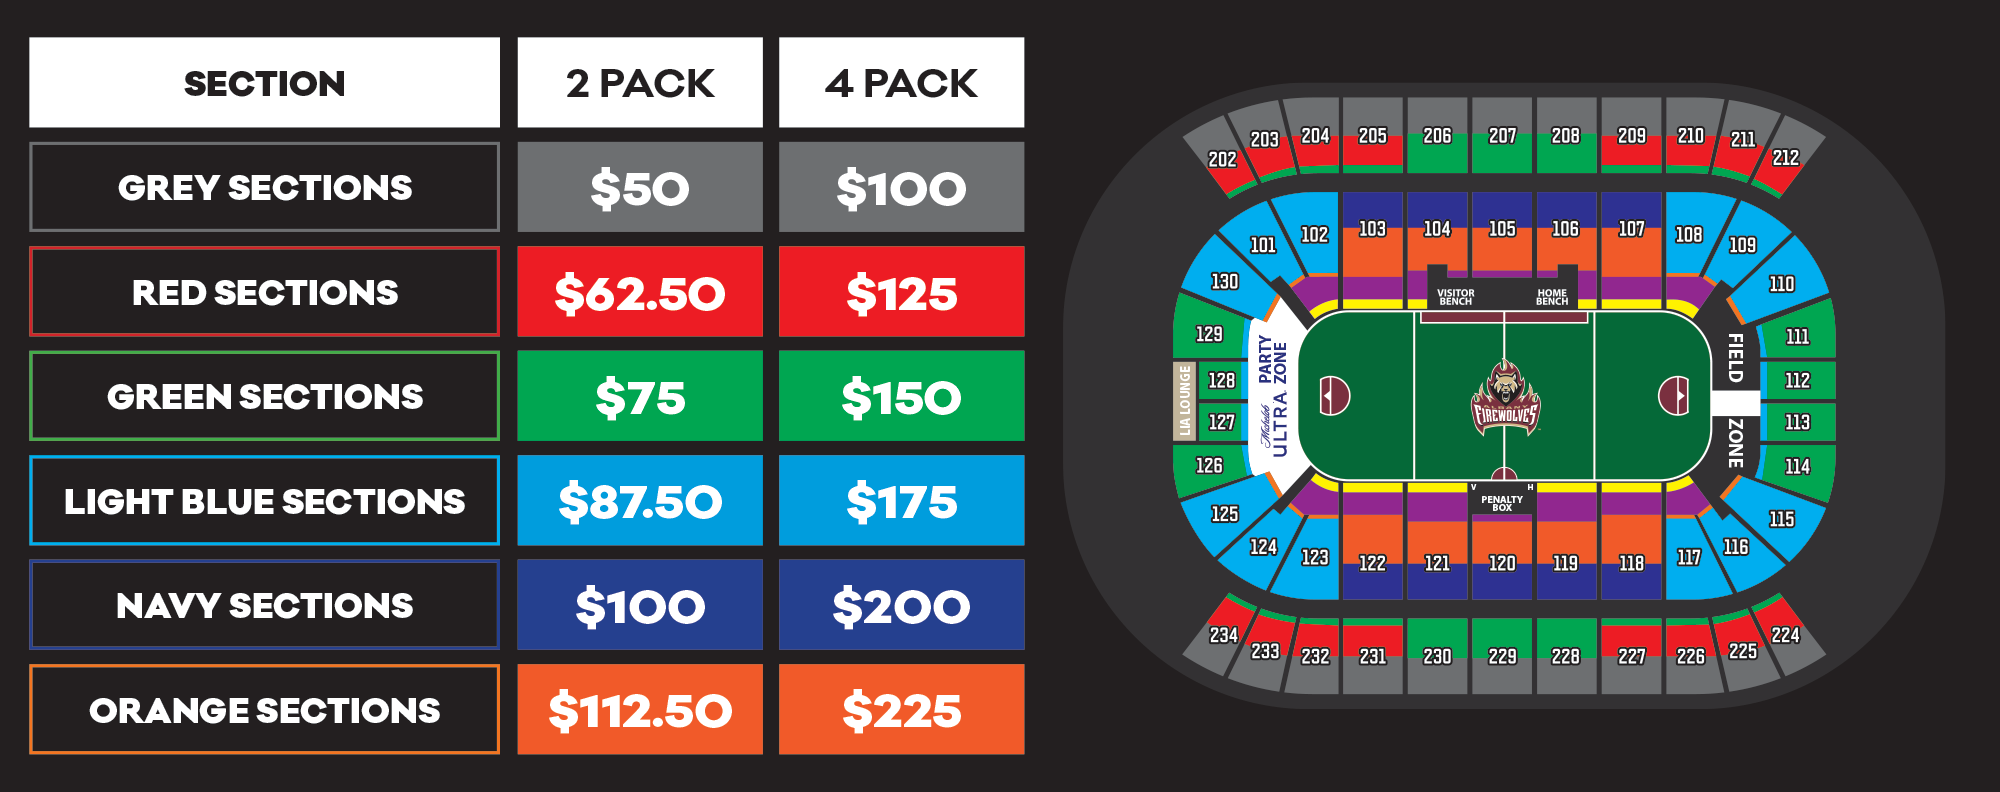 Family Pack Pricing